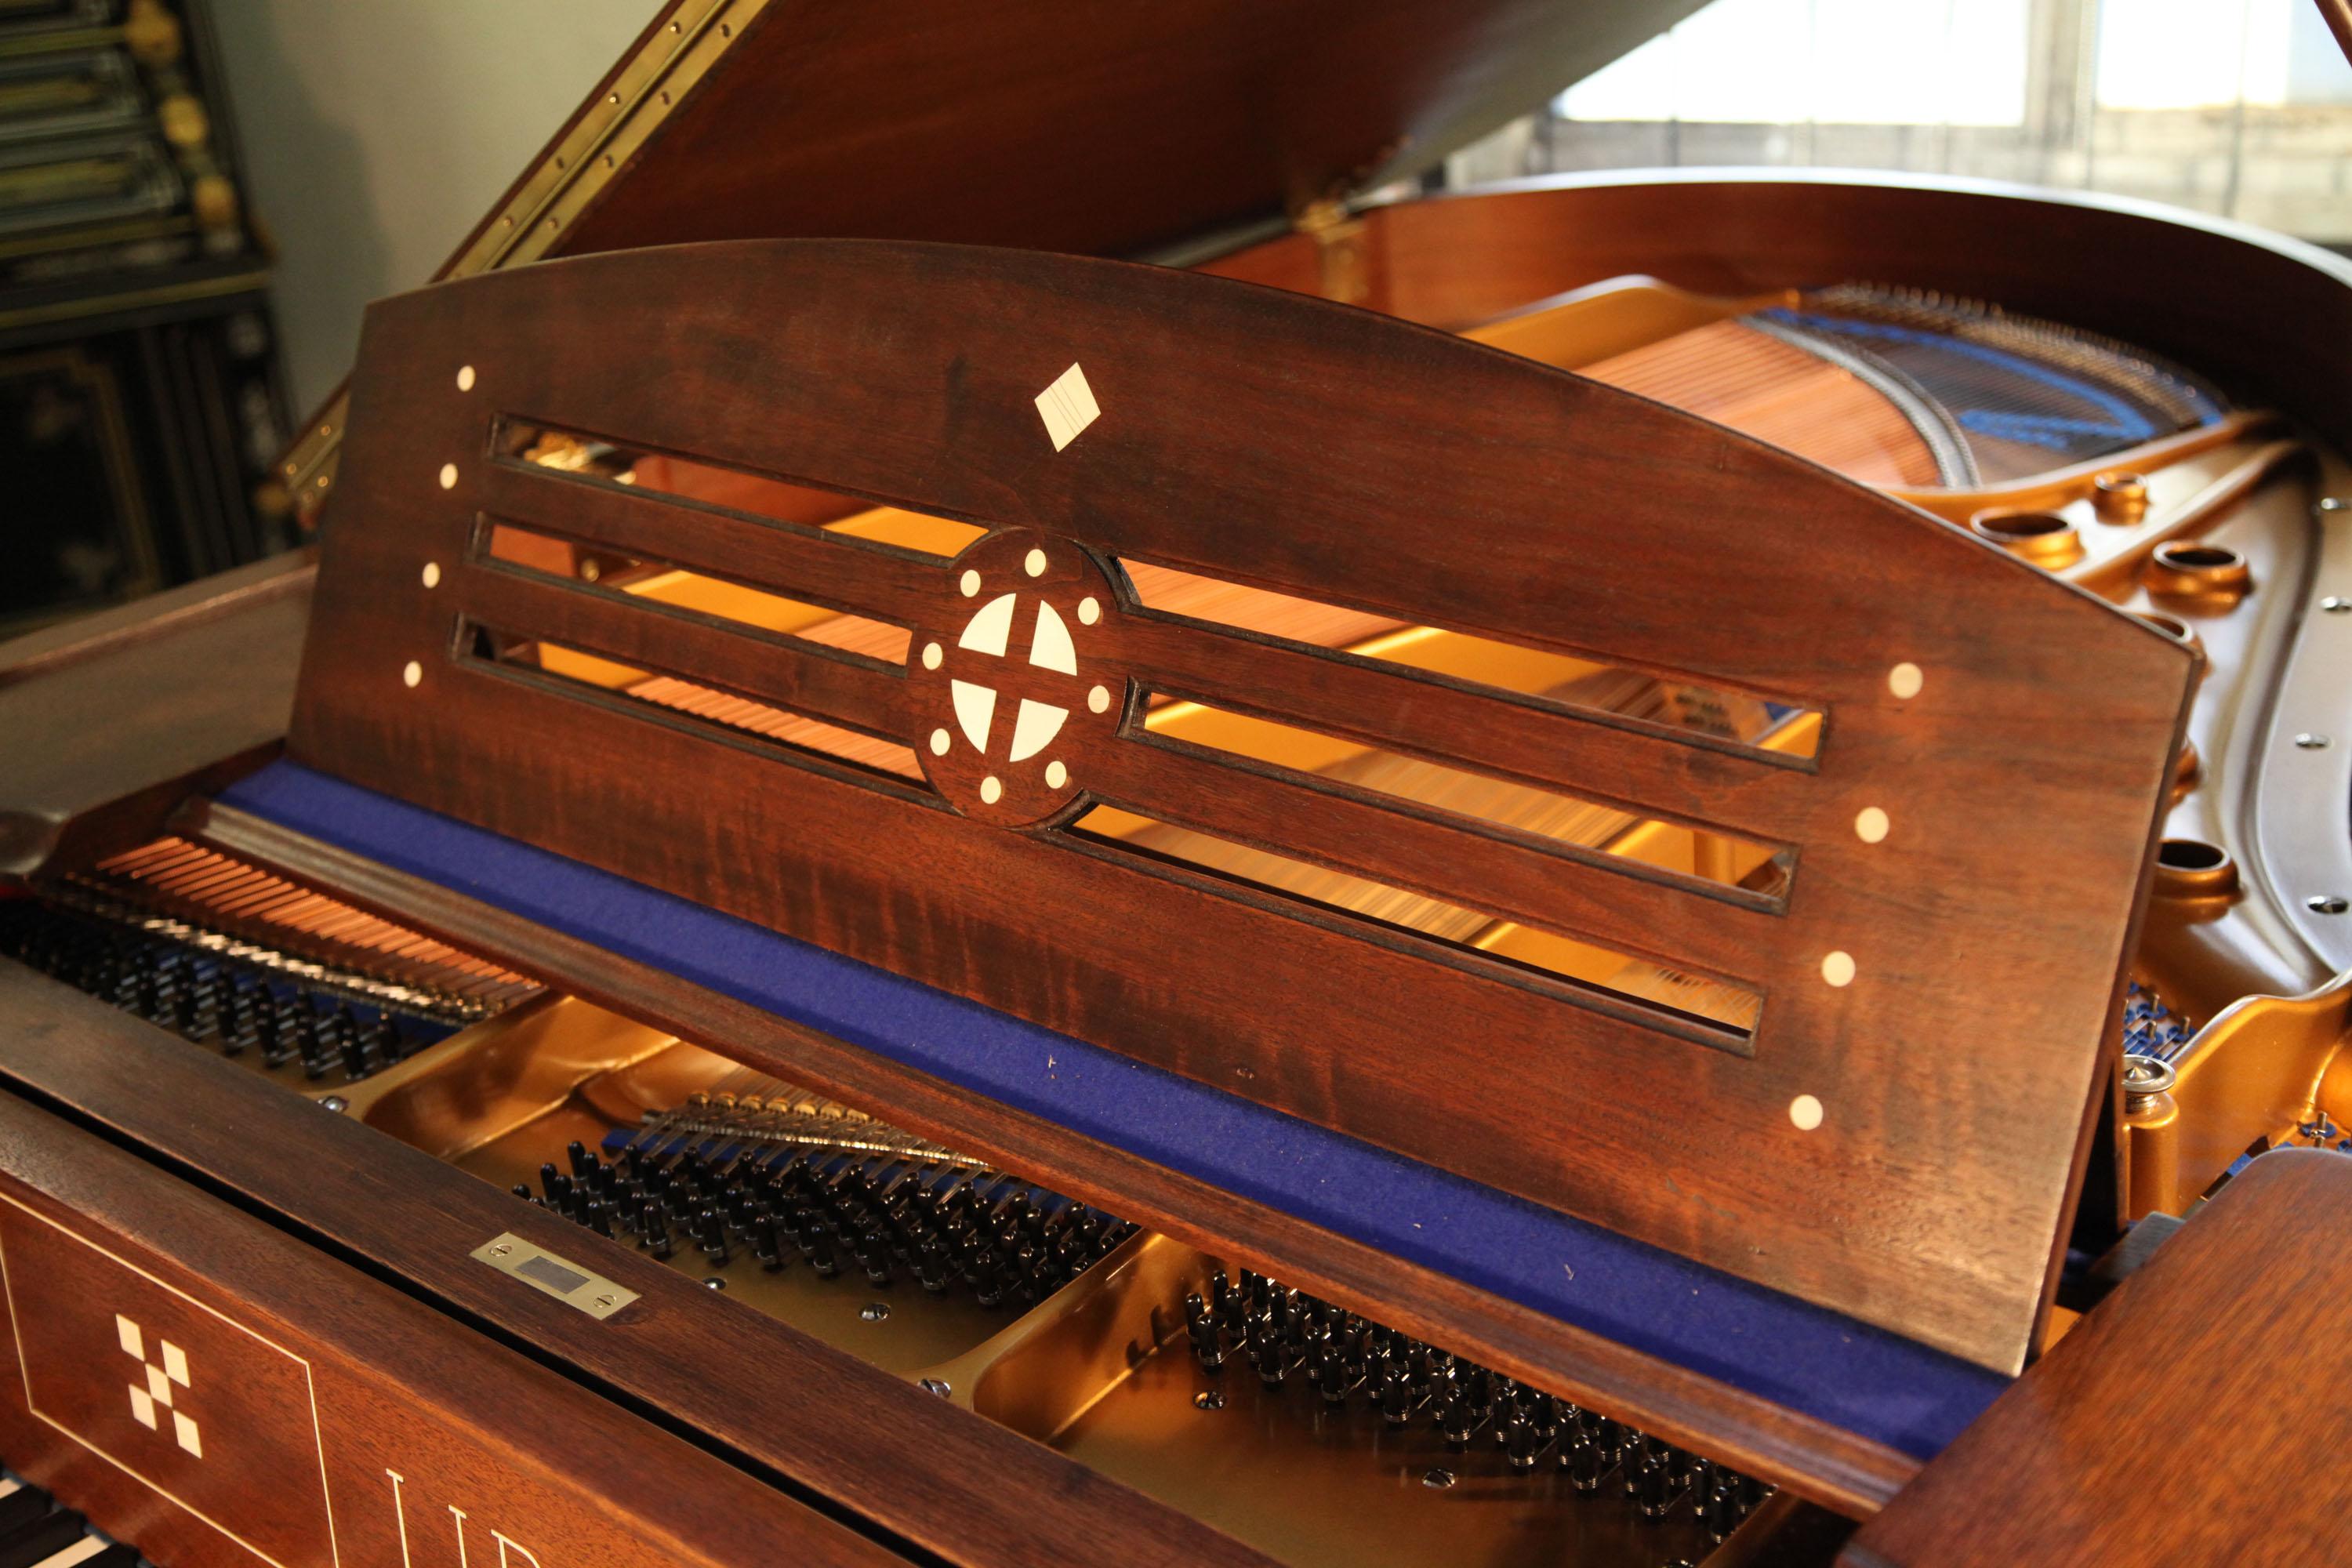 Arts and Crafts style, Lipp grand piano for sale with a mahogany case inlaid with symbols and designs from Germanic folklore. Case features ornate brass hinges and slatted cross stretcher. The mahogany cabinet is polished in matt to emphasize the